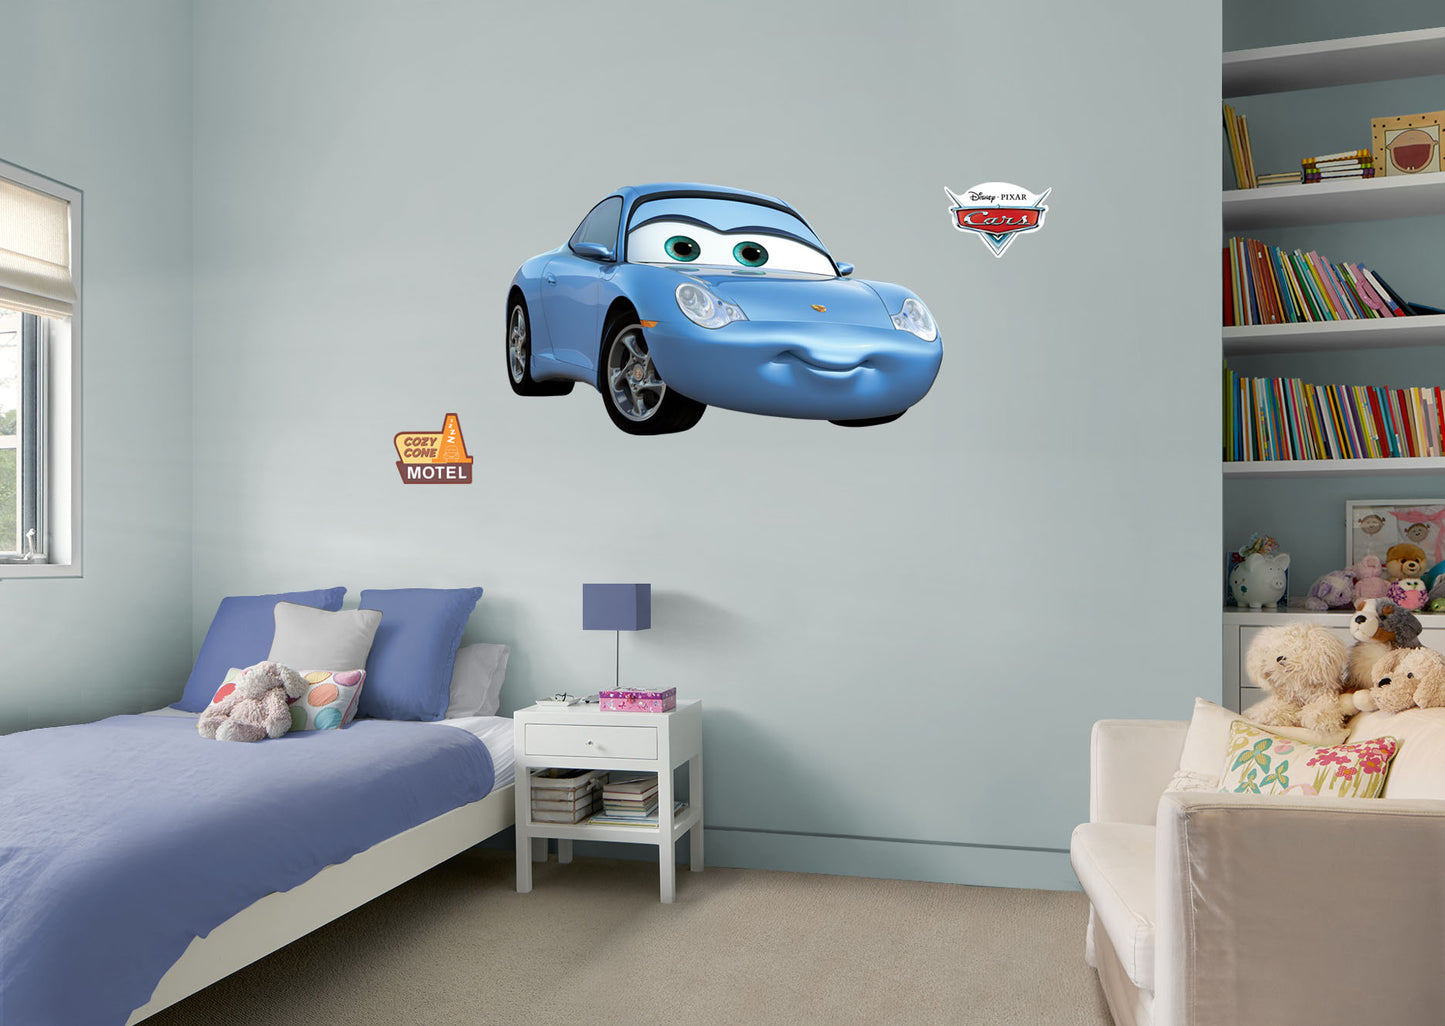 Cars: Sally Carrera RealBig        - Officially Licensed Disney Removable Wall   Adhesive Decal